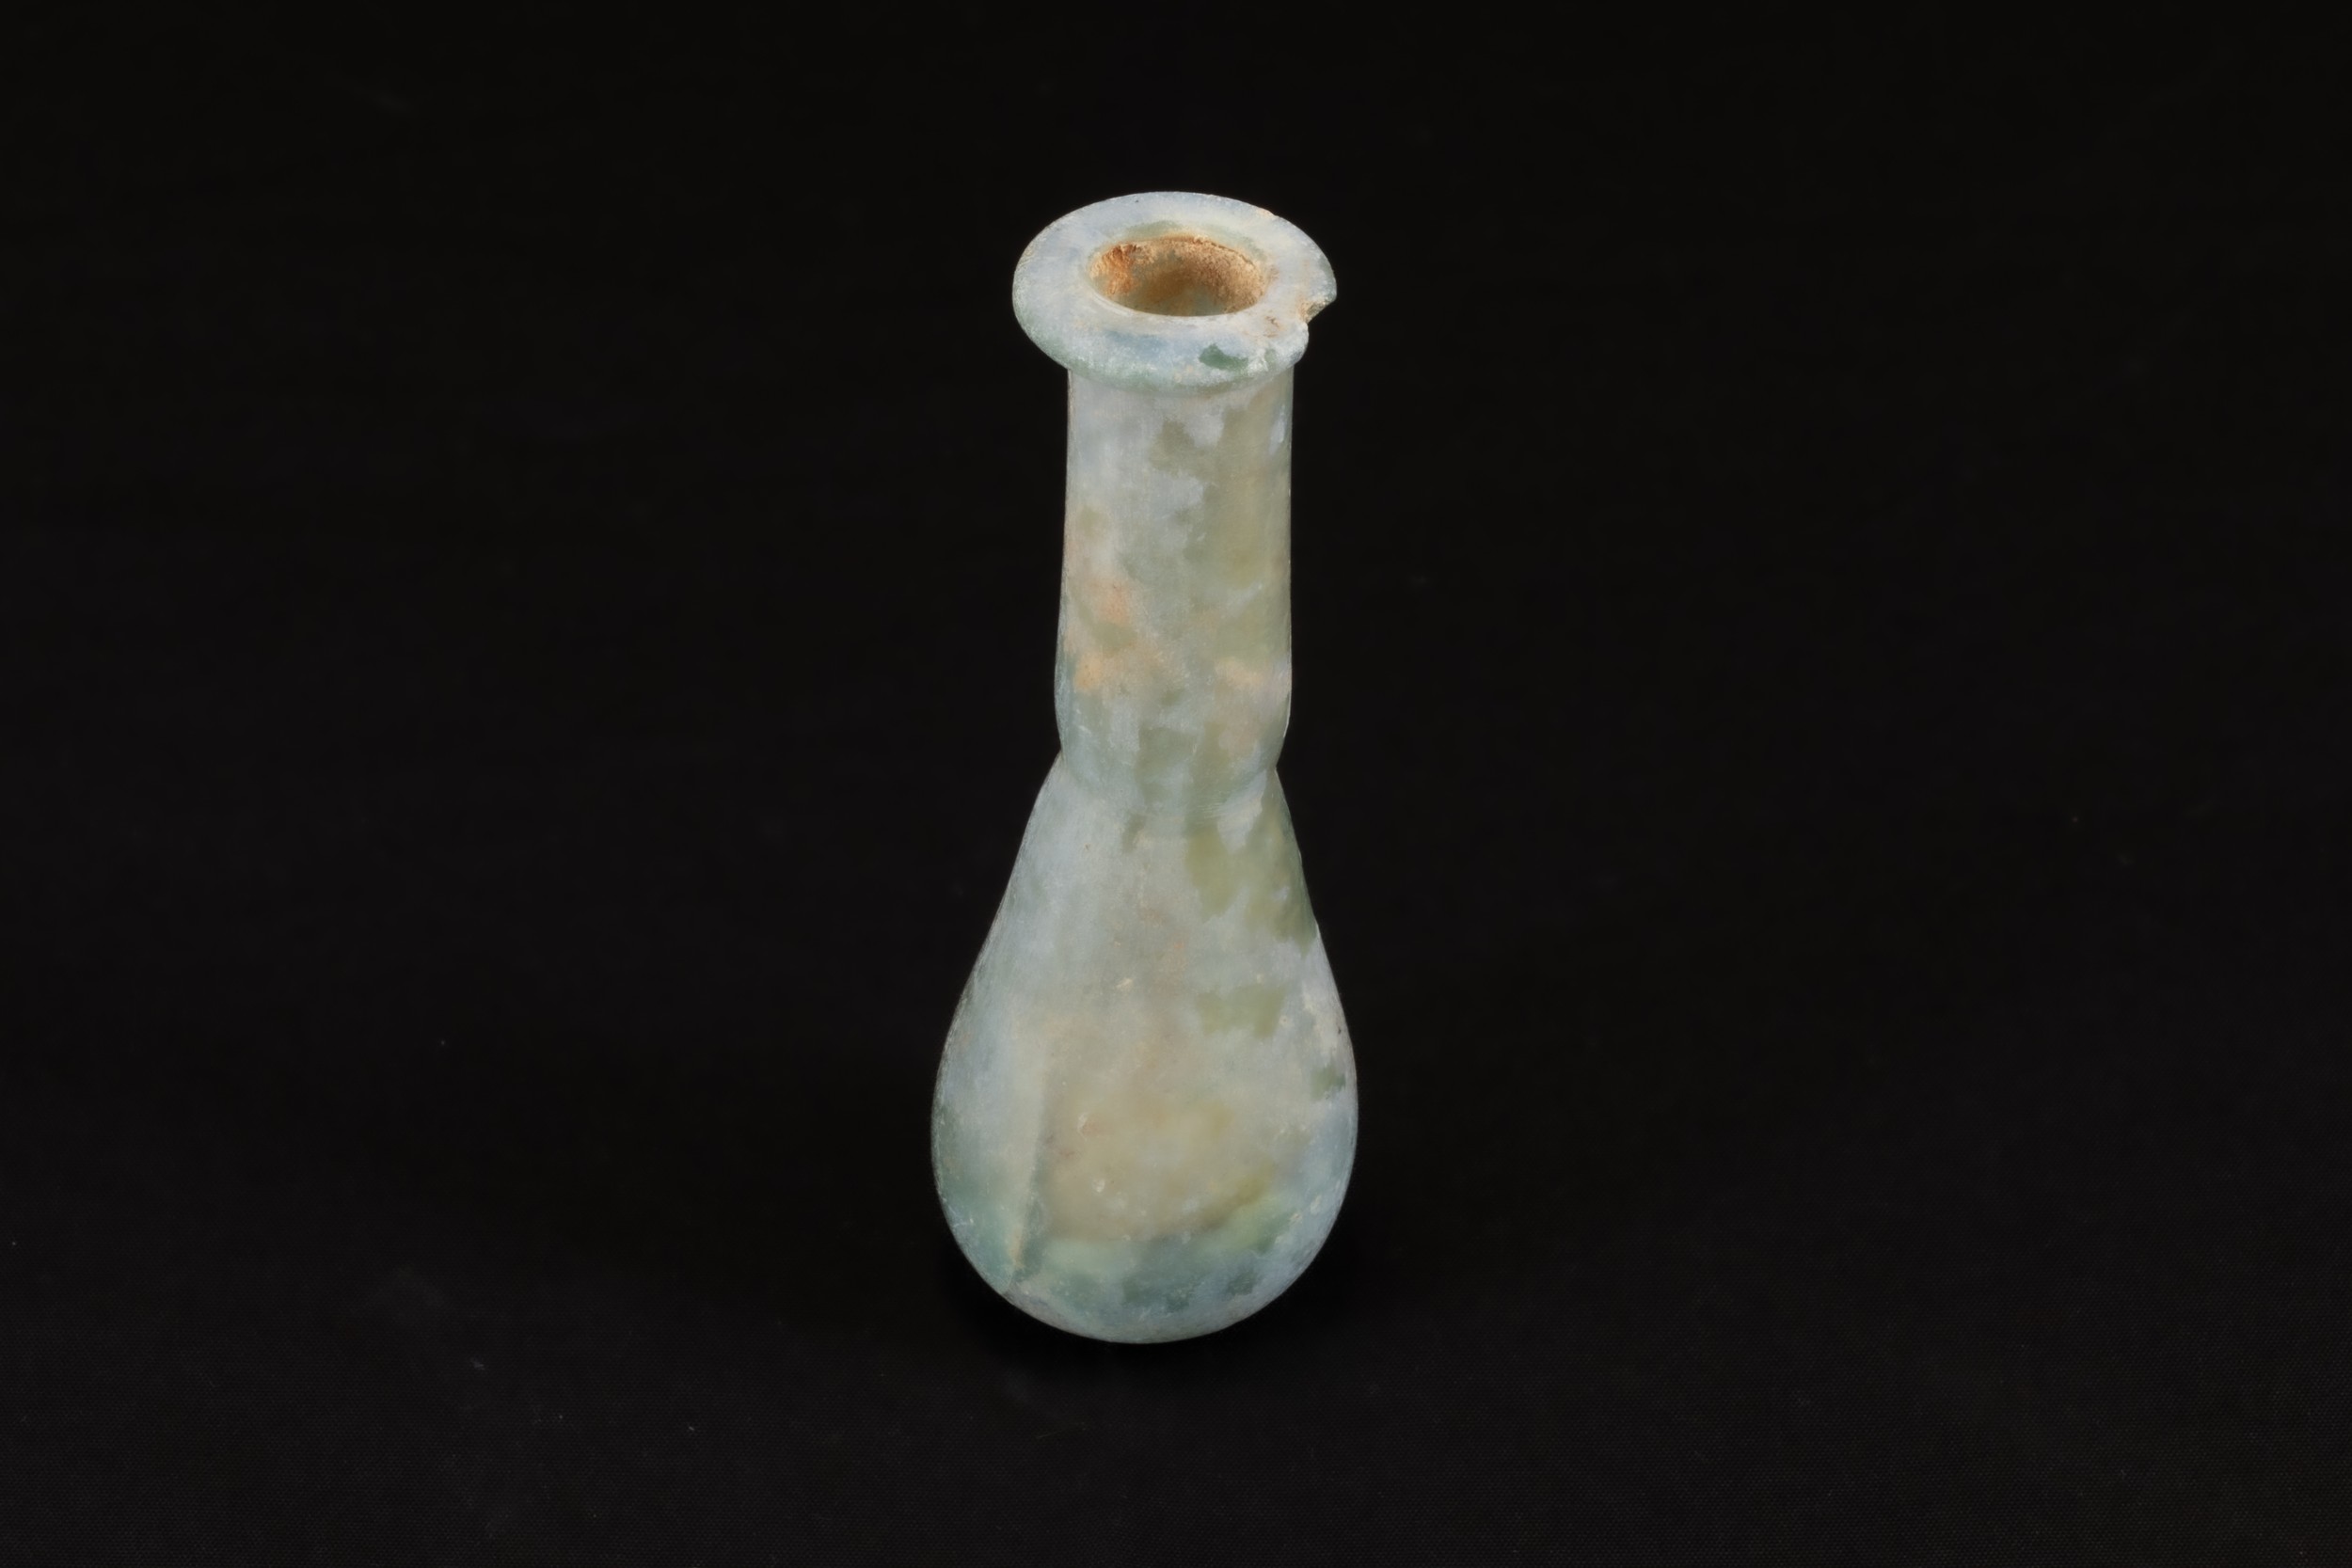 An Ancient Roman Glass Unguentarium Blown from Pale Translucent Glass with a Slight Teal Tint Circa 